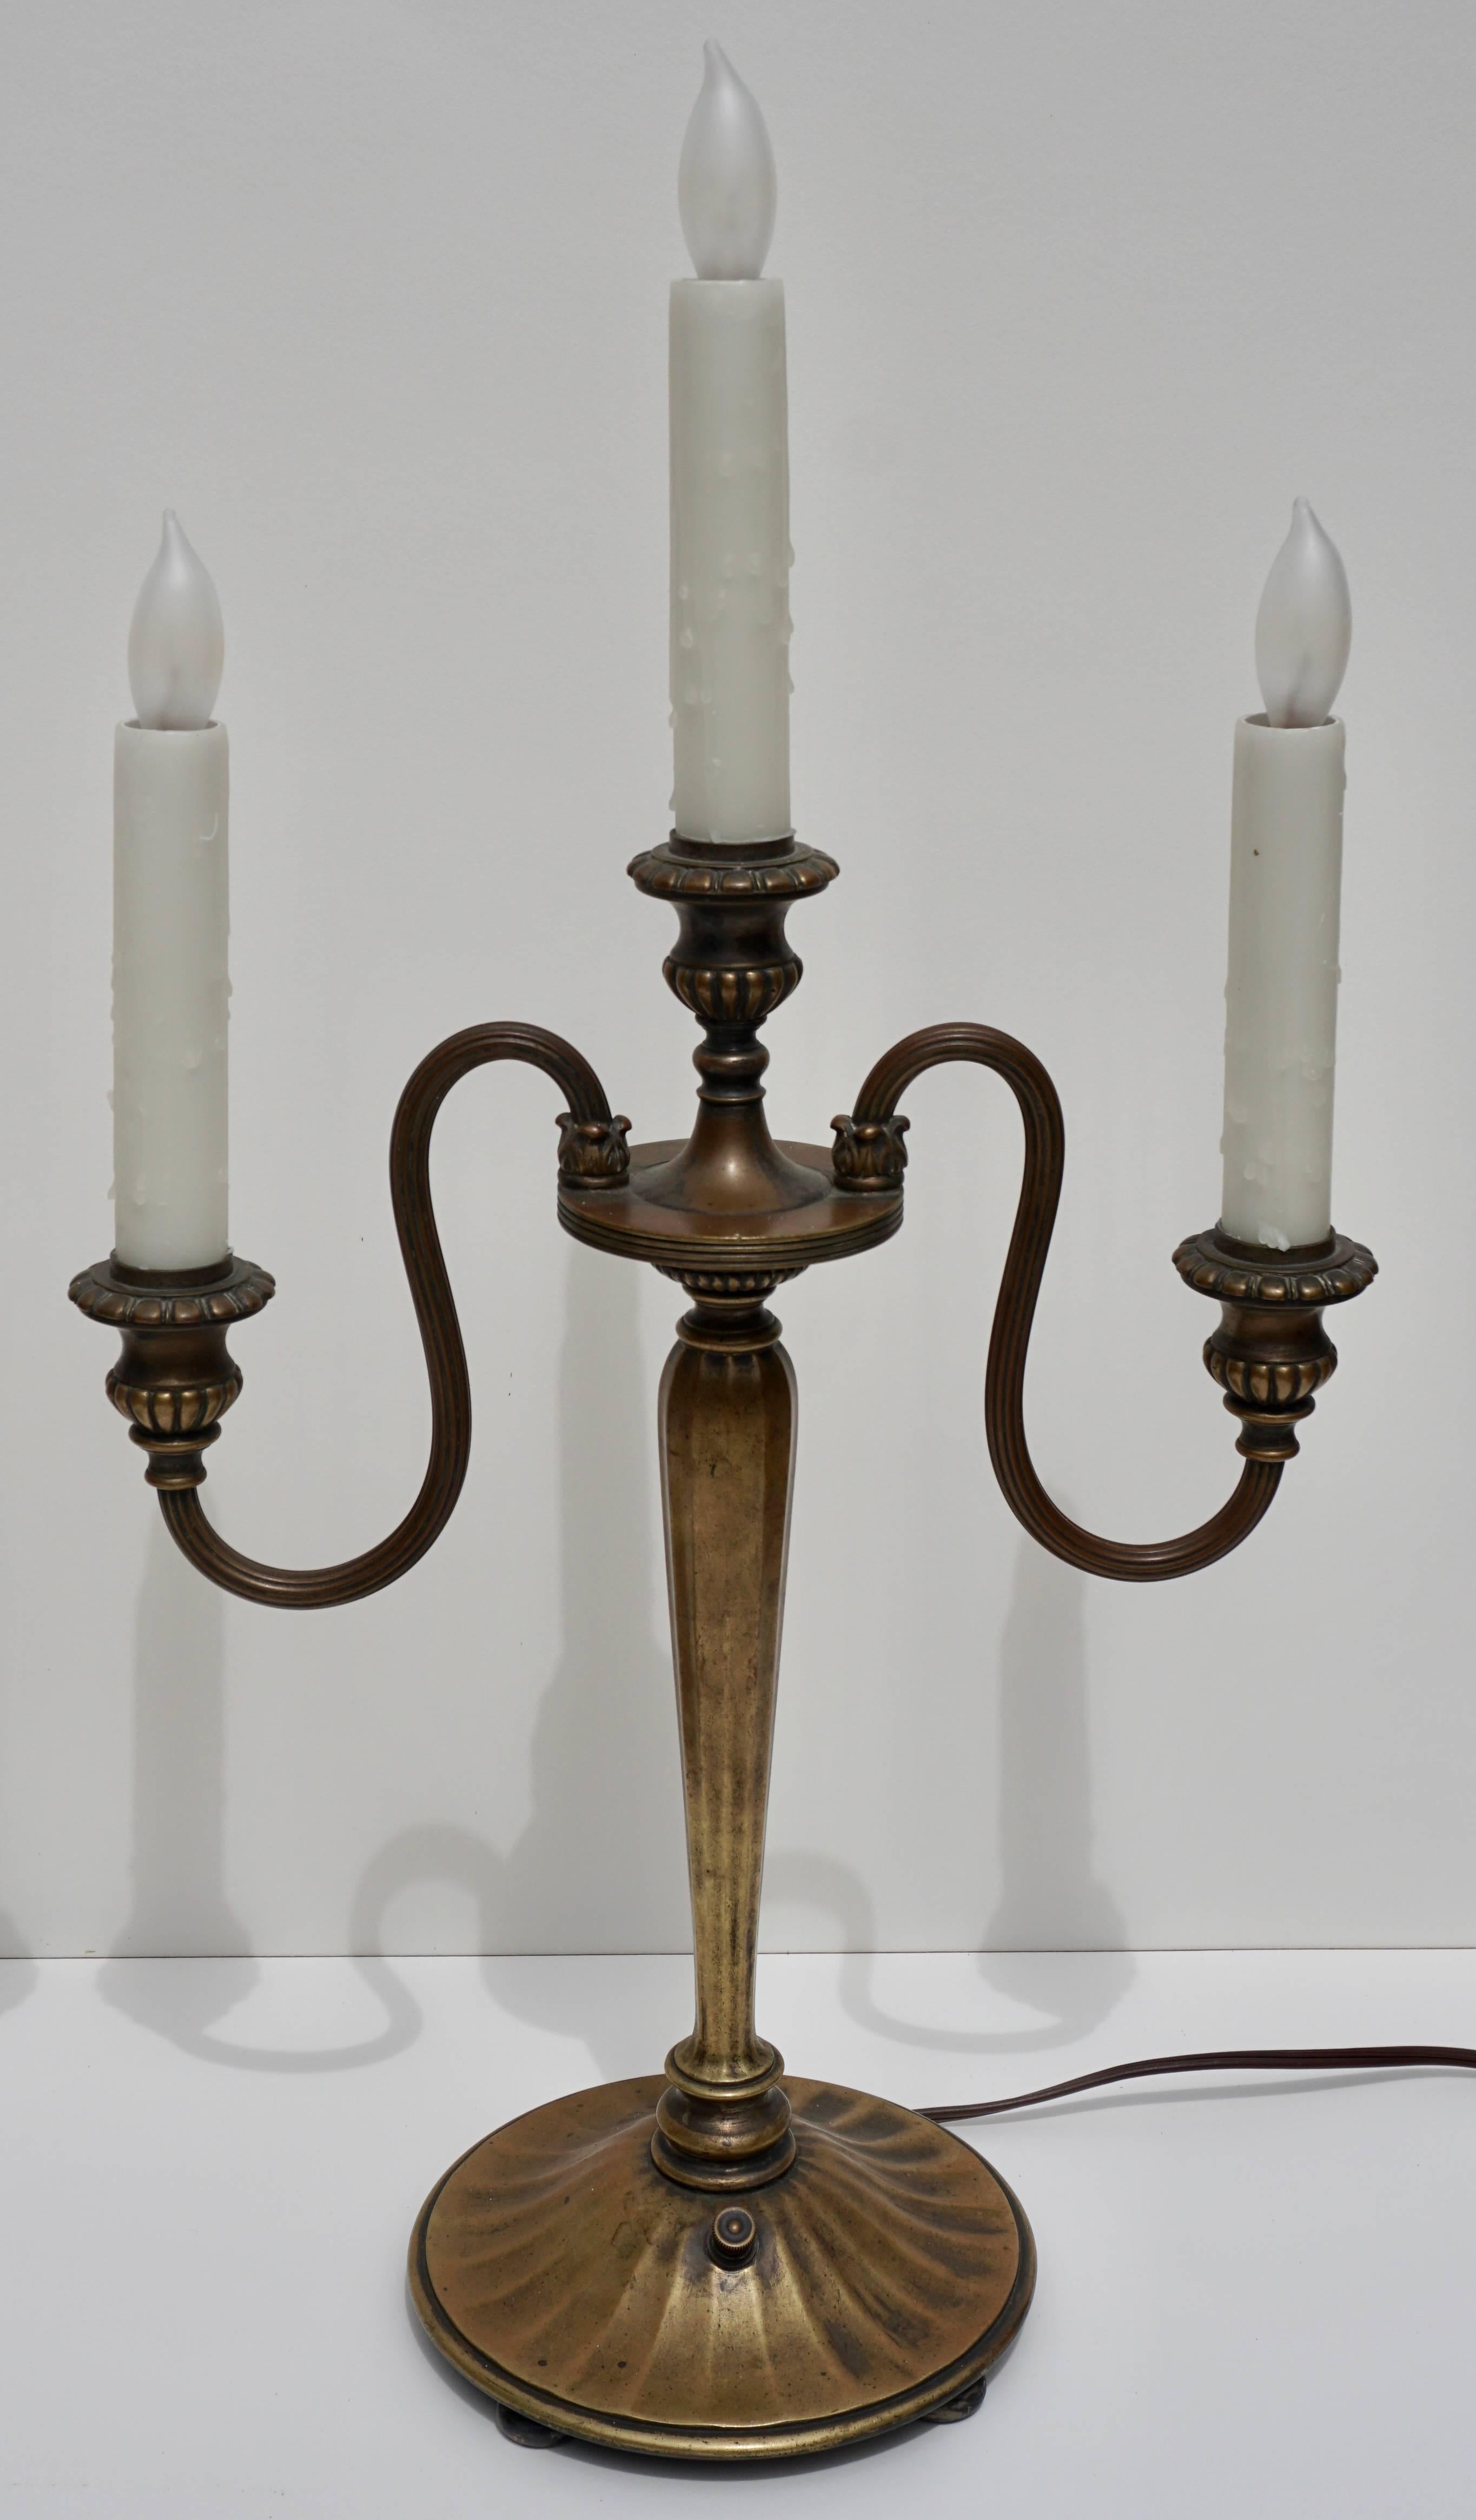 A very rare pair of Tiffany Studios candlestick lamps that are fully functional and produce a warm yellow and orange glowing light. Each candelabra lamp has two curving ‘S’ arms and a centre comprising three bobech lights (currently with 10W soft